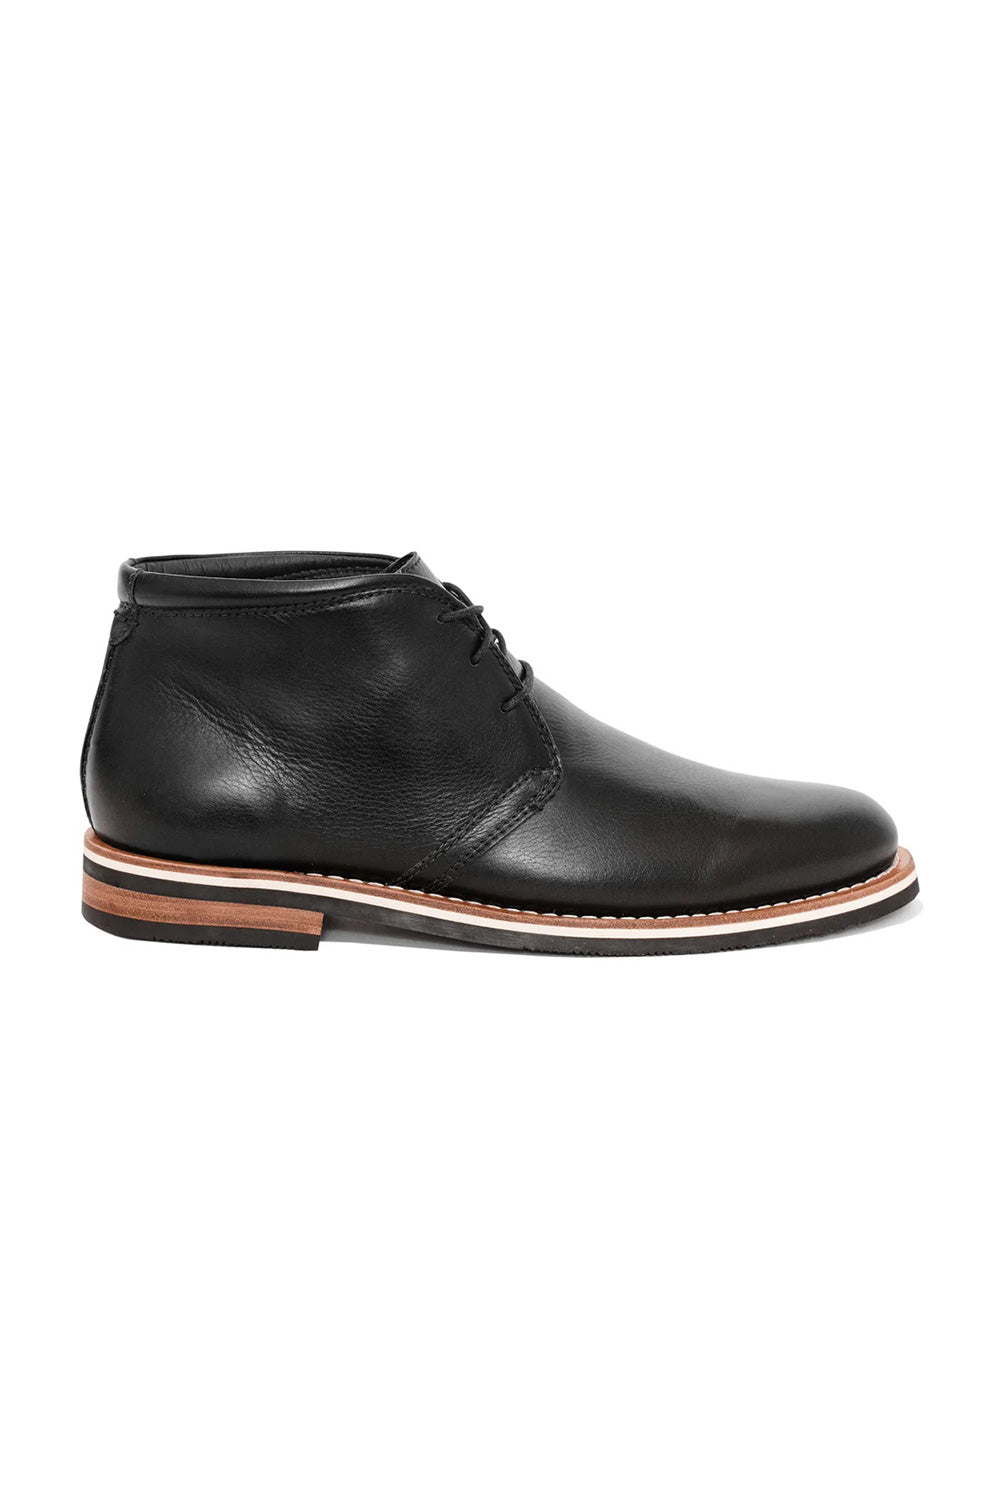 Helm Boots - The Hynes - Black - Side